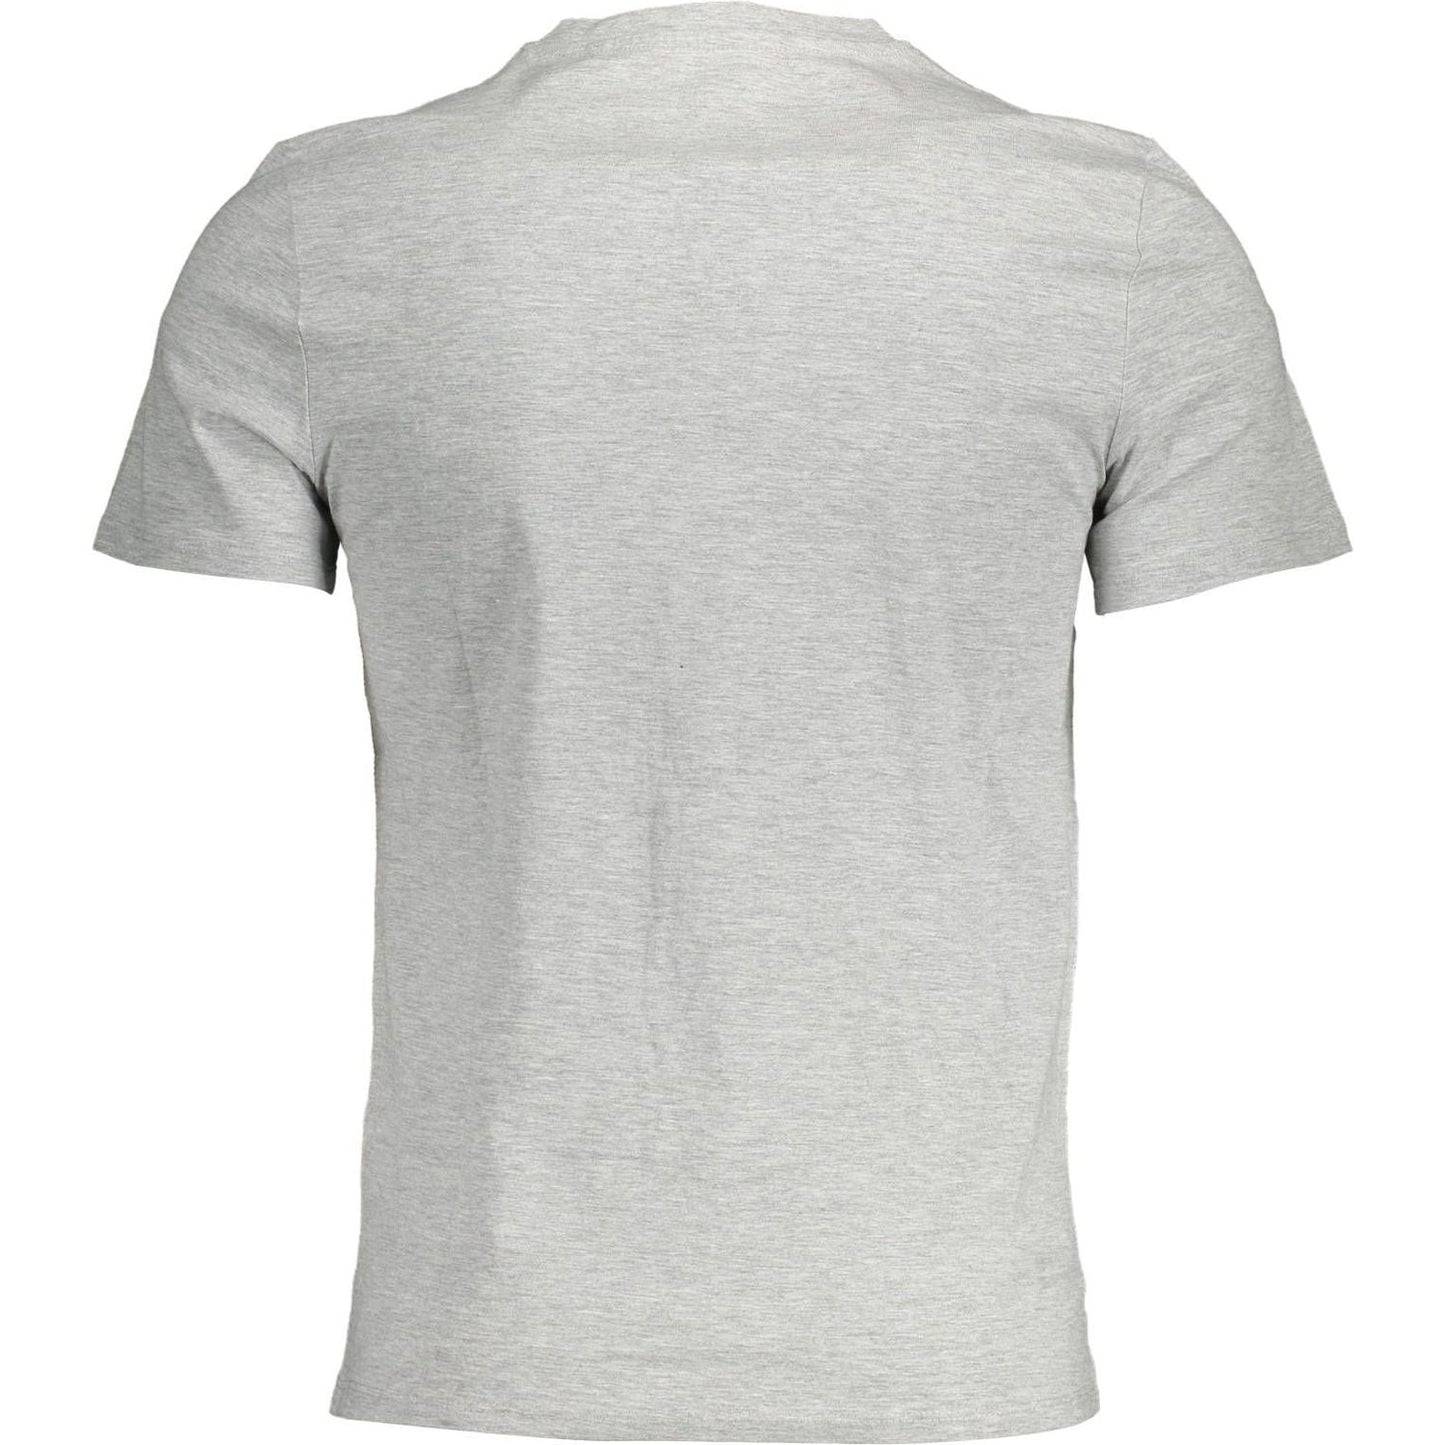 Guess Jeans Chic Gray Slim Fit Logo Tee for Men chic-gray-slim-fit-logo-tee-for-men